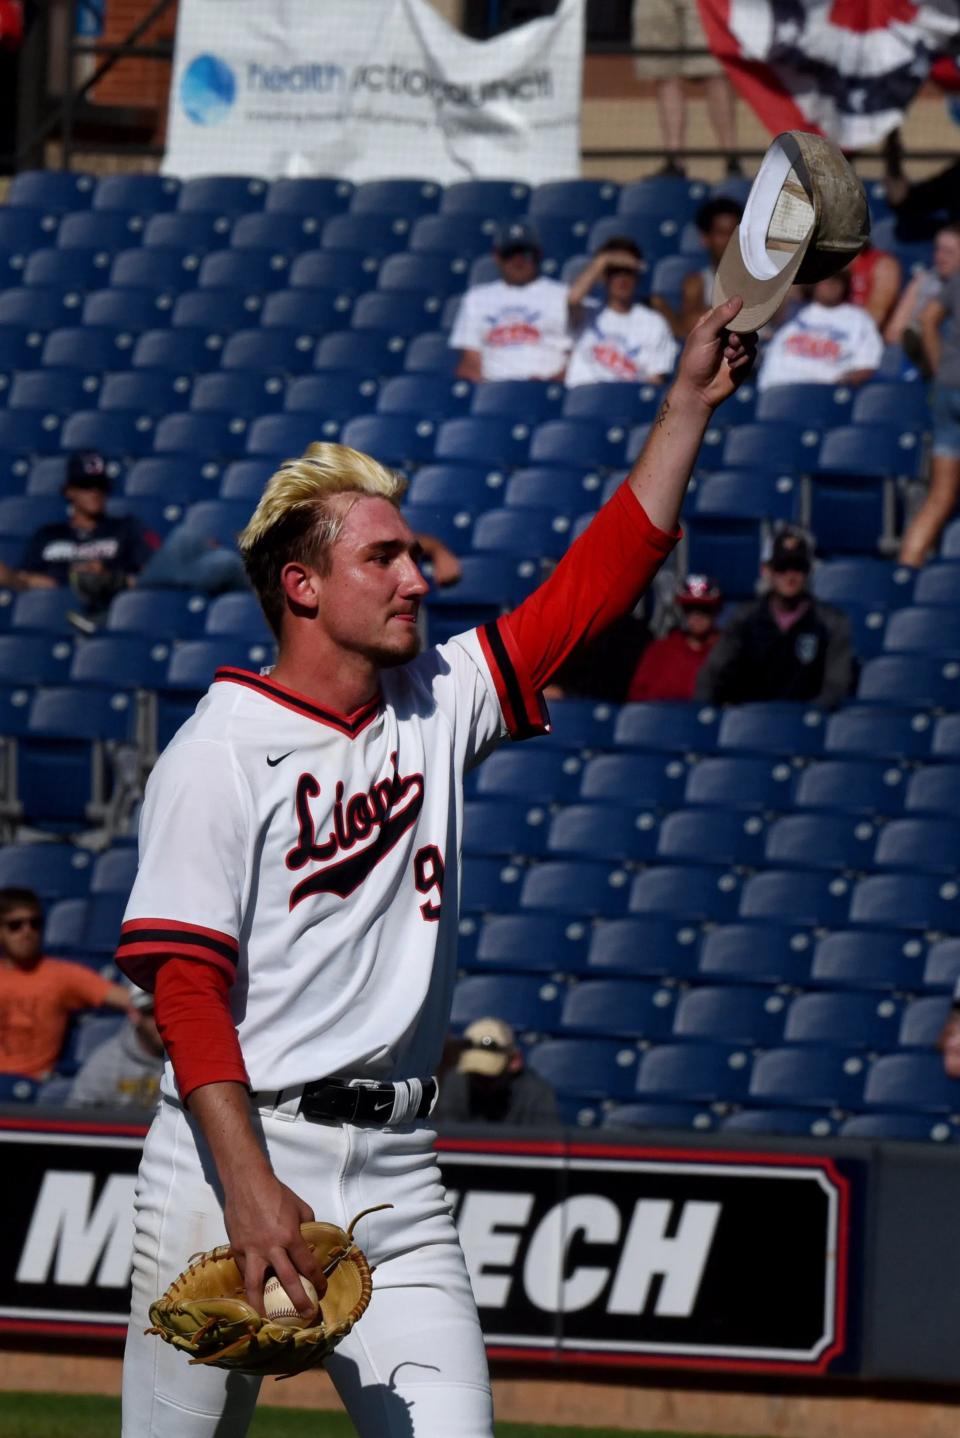 Liberty Union senior Jacob Miller waves to fans as he leaves the mound after pitching against Apple Creek Waynedale in a Division III state semifinal June 9 at Canal Park in Akron. The Lions lost 4-3.